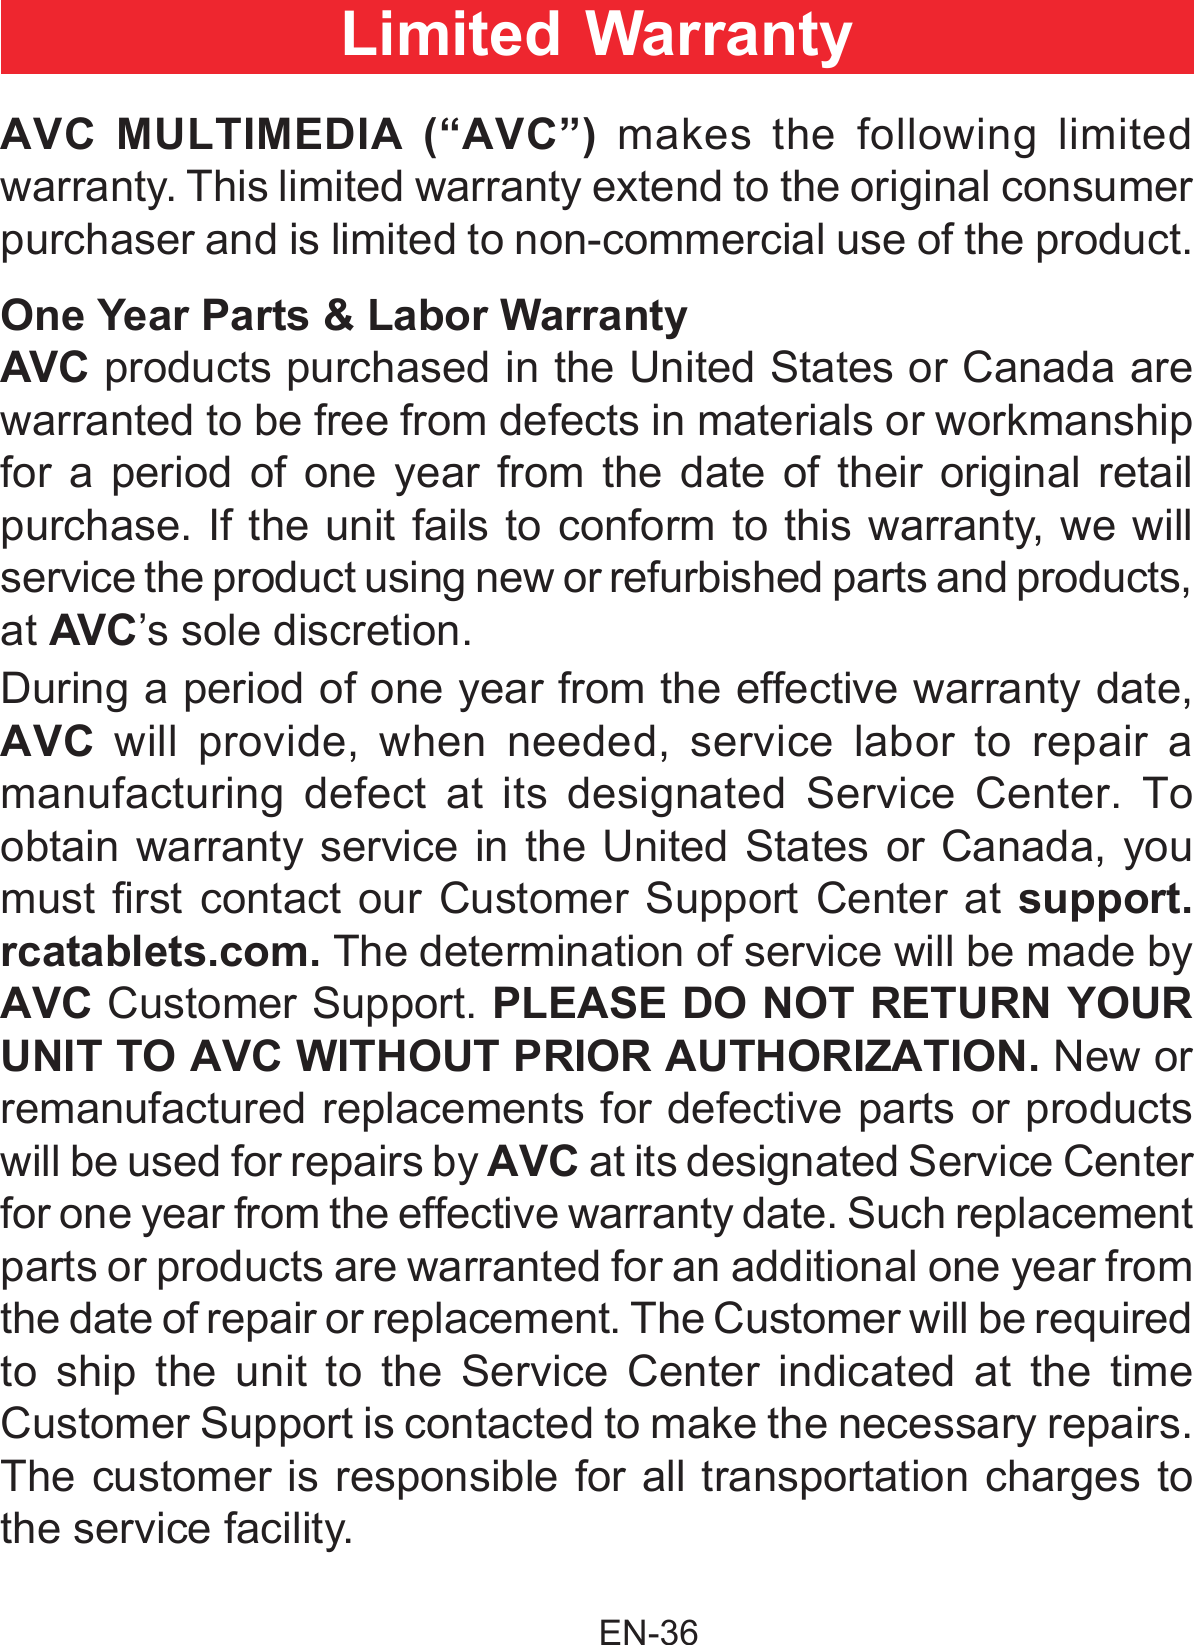                                                EN-36 AVC MULTIMEDIA (“AVC”) makes the following limited warranty. This limited warranty extend to the original consumer purchaser and is limited to non-commercial use of the product.One Year Parts &amp; Labor WarrantyAVC products purchased in the United States or Canada are warranted to be free from defects in materials or workmanship for a period of one year from the date of their original retail purchase. If the unit fails to conform to this warranty, we will service the product using new or refurbished parts and products, at AVC’s sole discretion.During a period of one year from the effective warranty date, AVC will provide, when needed, service labor to repair a manufacturing defect at its designated Service Center. To obtain warranty service in the United States or Canada, you must rst  contact our Customer Support Center at support.rcatablets.com. The determination of service will be made by AVC Customer Support. PLEASE DO NOT RETURN YOUR UNIT TO AVC WITHOUT PRIOR AUTHORIZATION. New or remanufactured replacements for defective parts or products will be used for repairs by AVC at its designated Service Center for one year from the effective warranty date. Such replacement parts or products are warranted for an additional one year from the date of repair or replacement. The Customer will be required to ship the unit to the Service Center indicated at the time Customer Support is contacted to make the necessary repairs. The customer is responsible for all transportation charges to the service facility.Limited Warranty